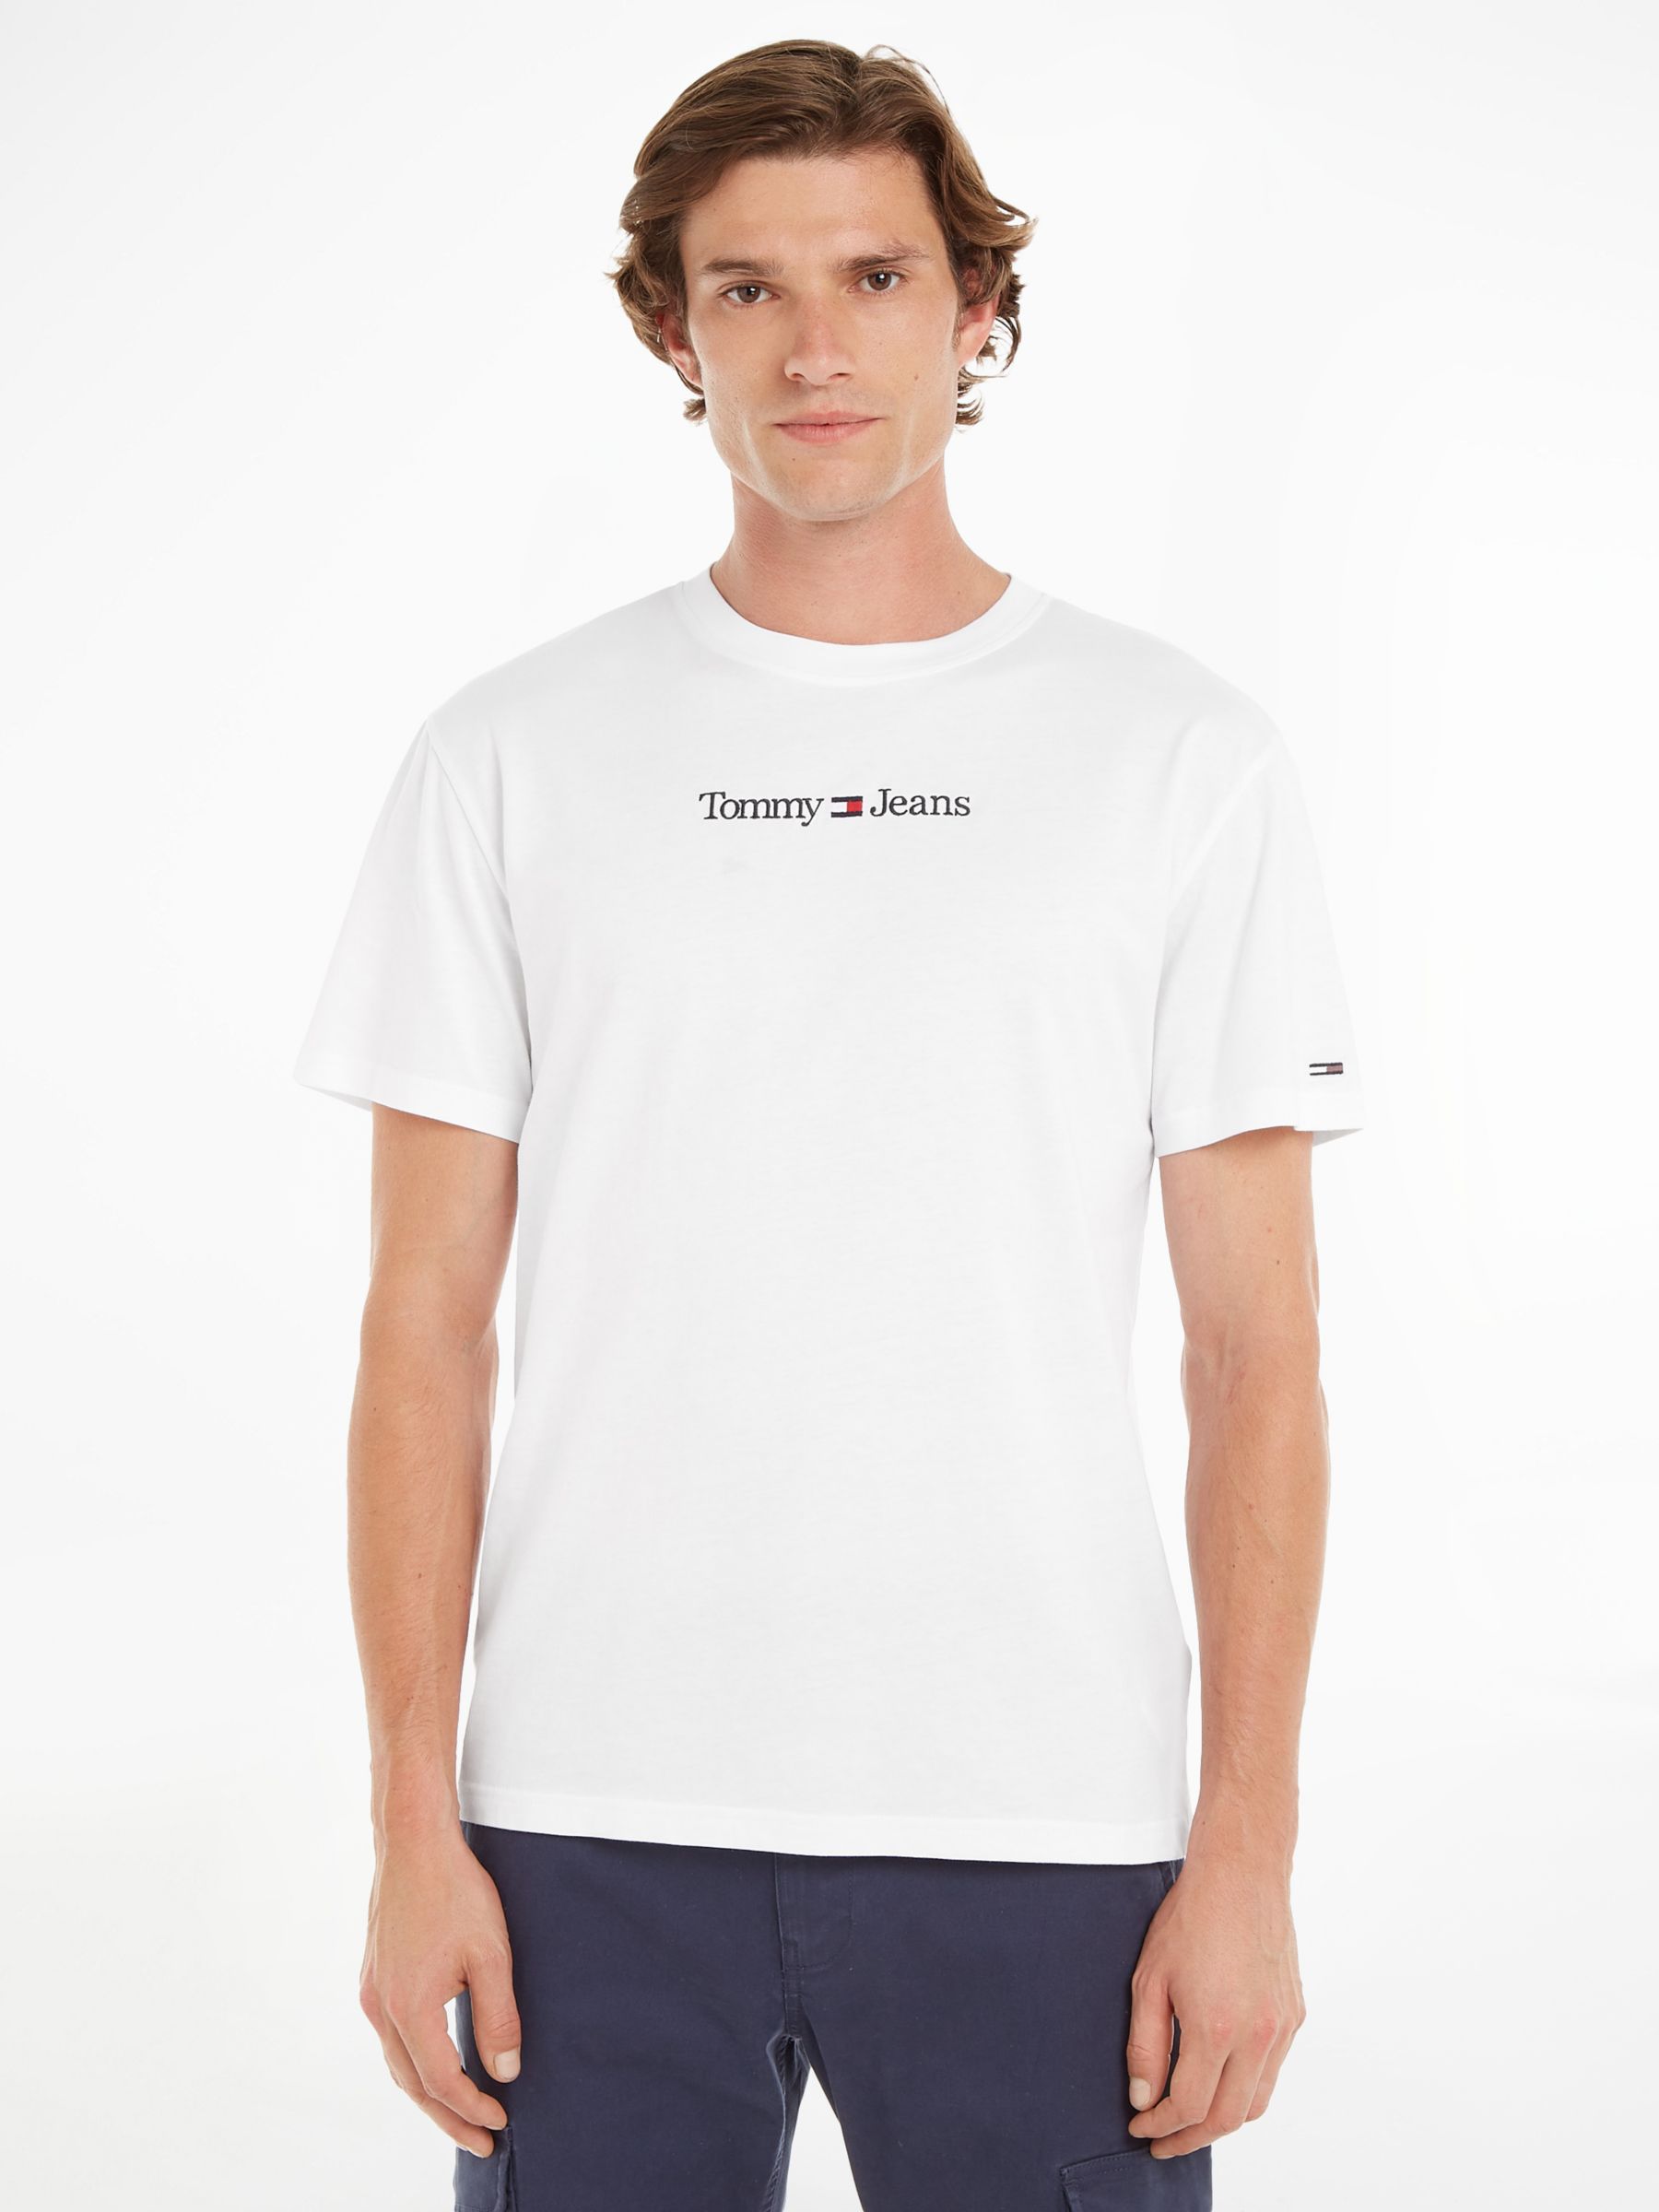 Tommy Jeans Classic Linear T-Shirt, White John Lewis & Partners